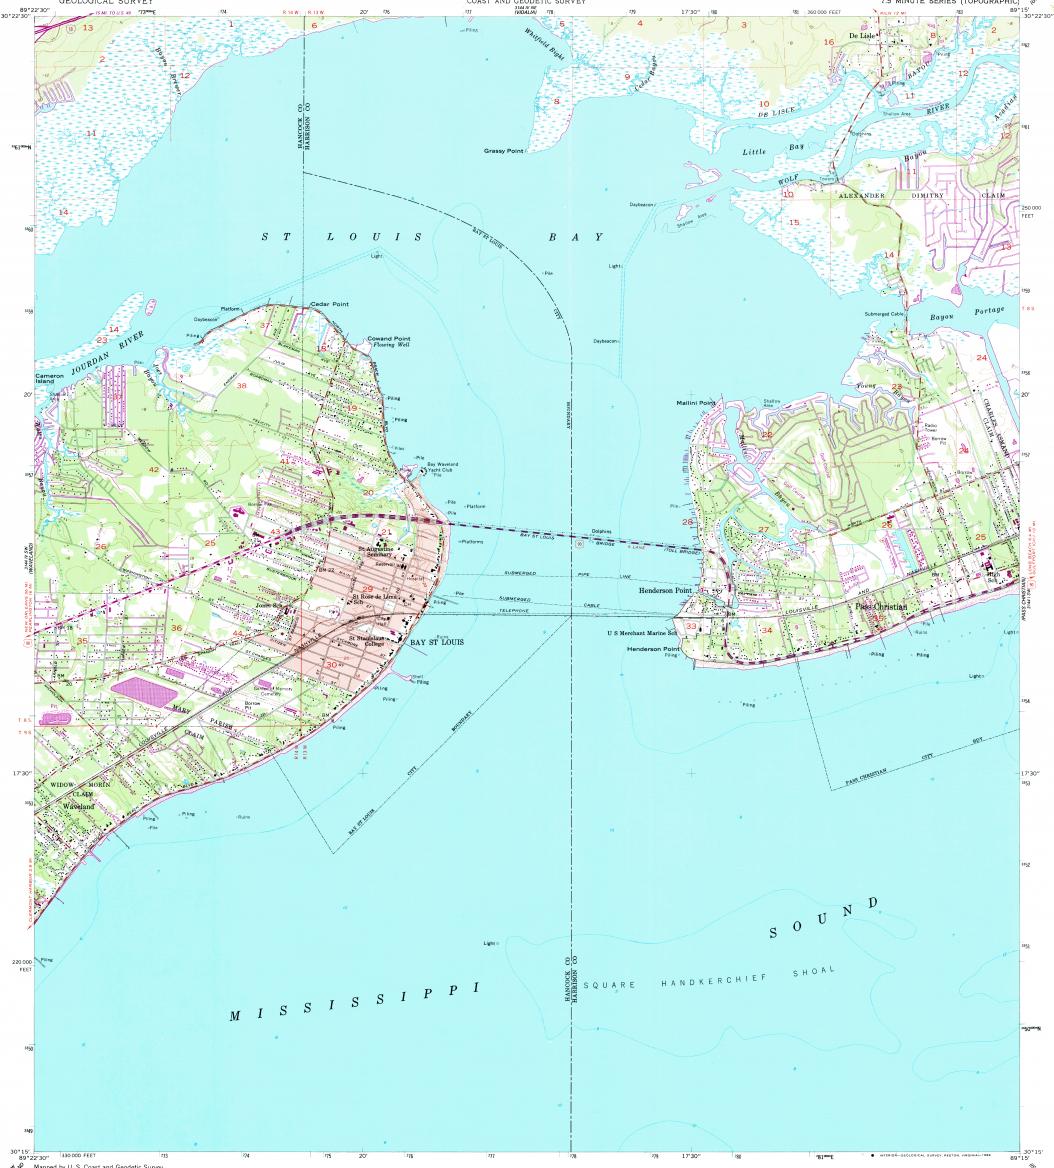 Download topographic map in area of Bay St. Louis - www.bagssaleusa.com